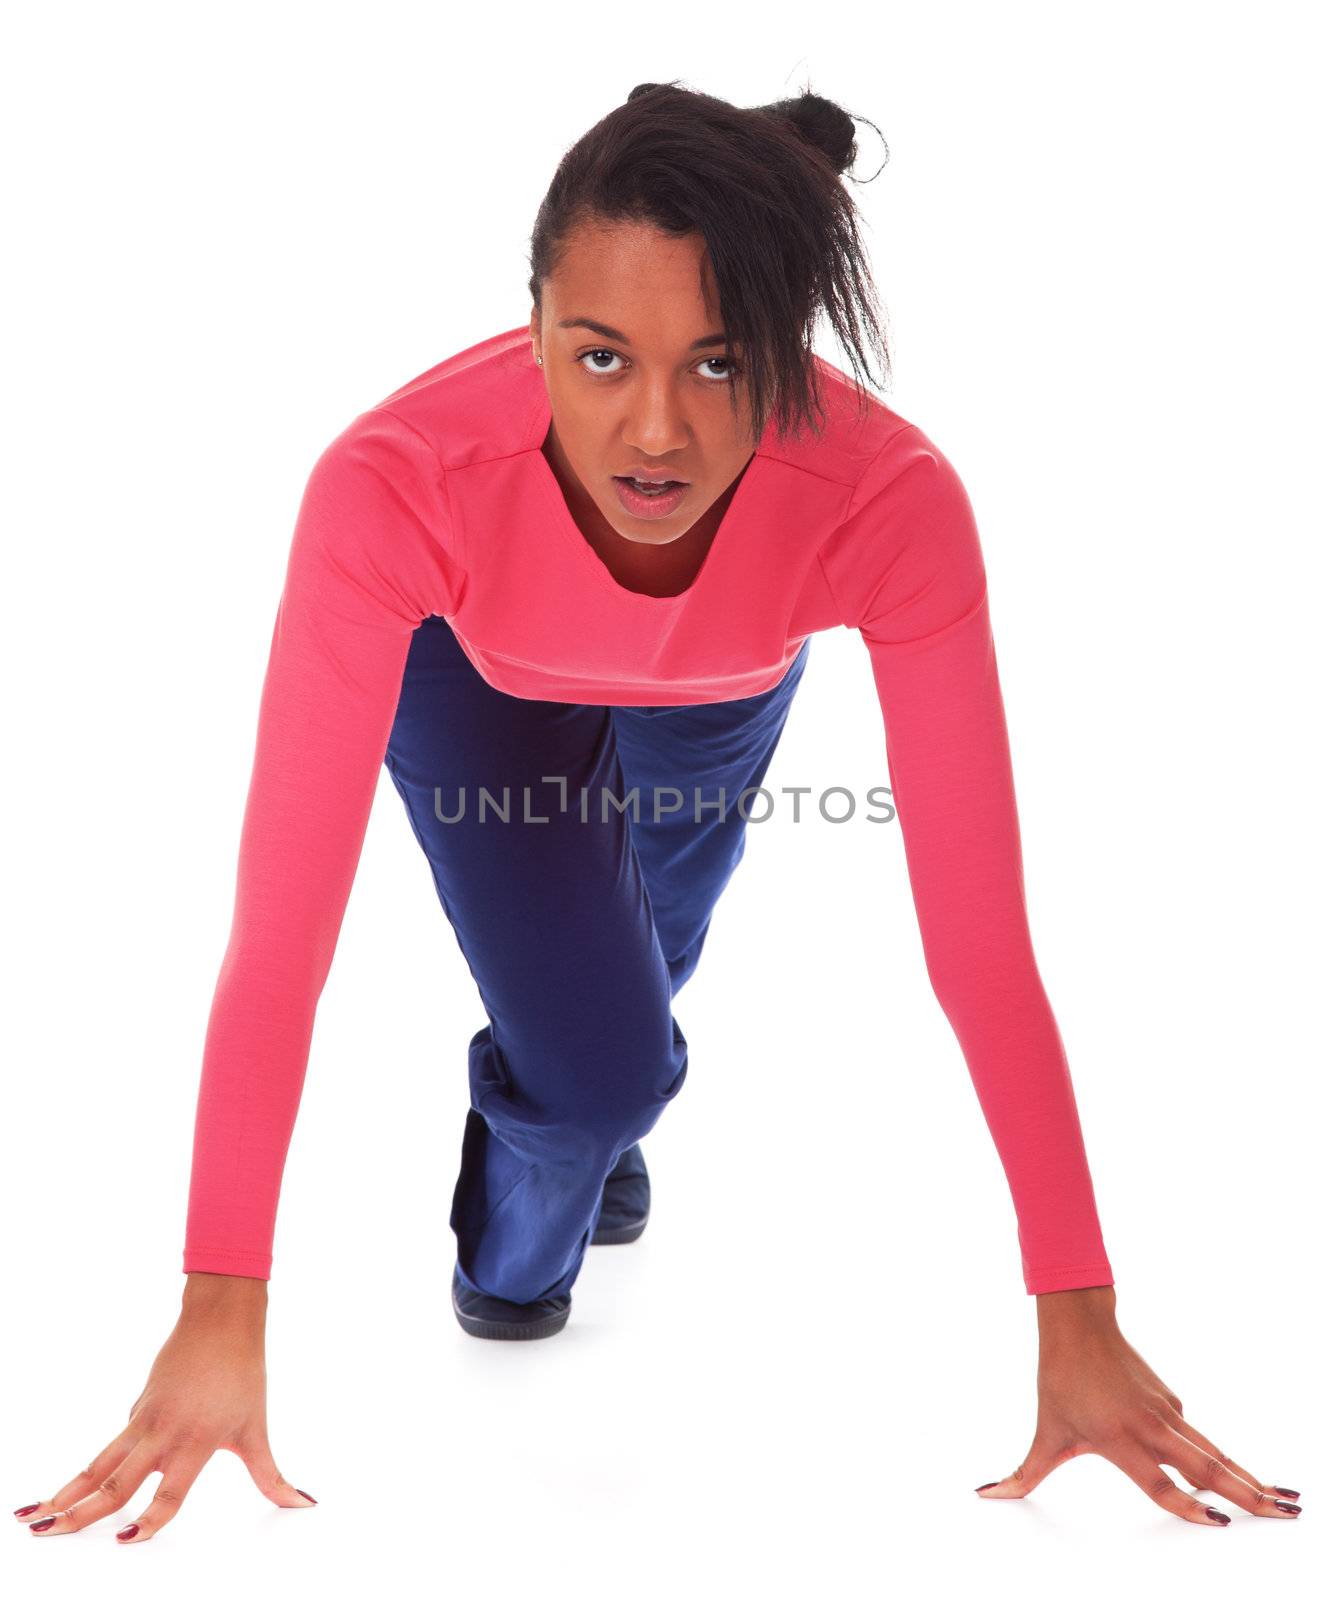 Female athlete in position to start running, isolated on white background